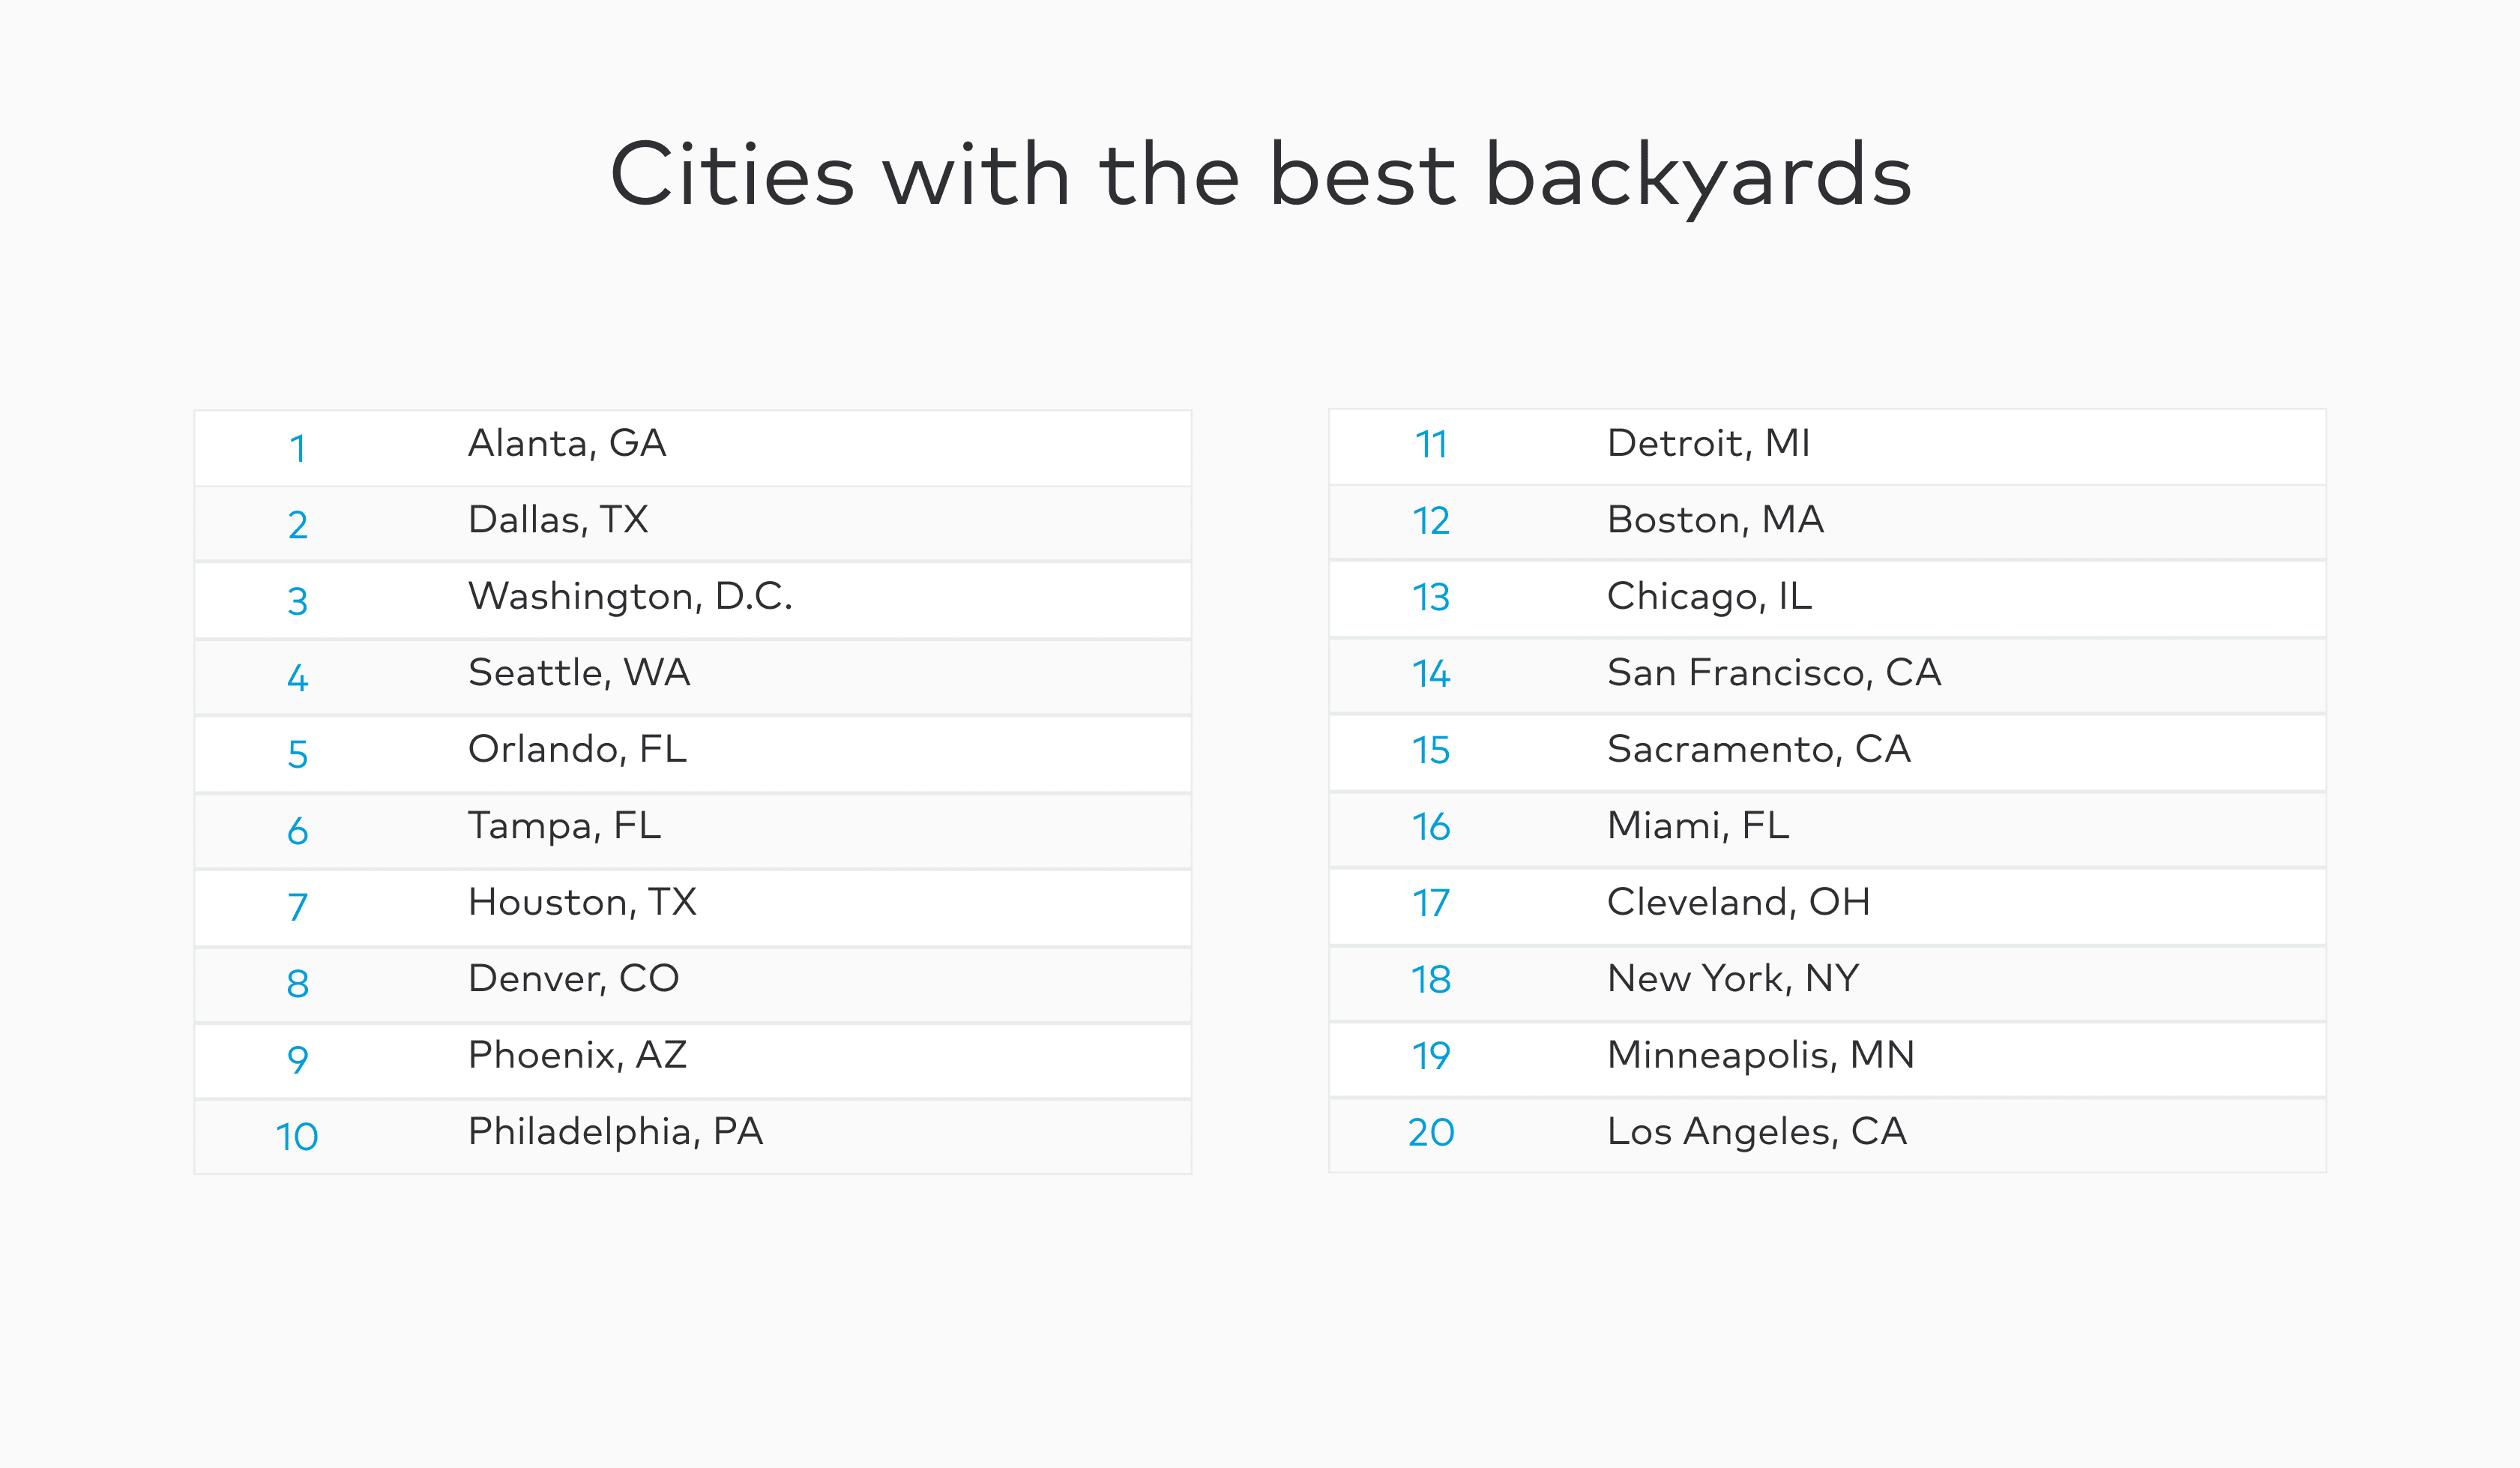 U.S. cities with the best backyards table